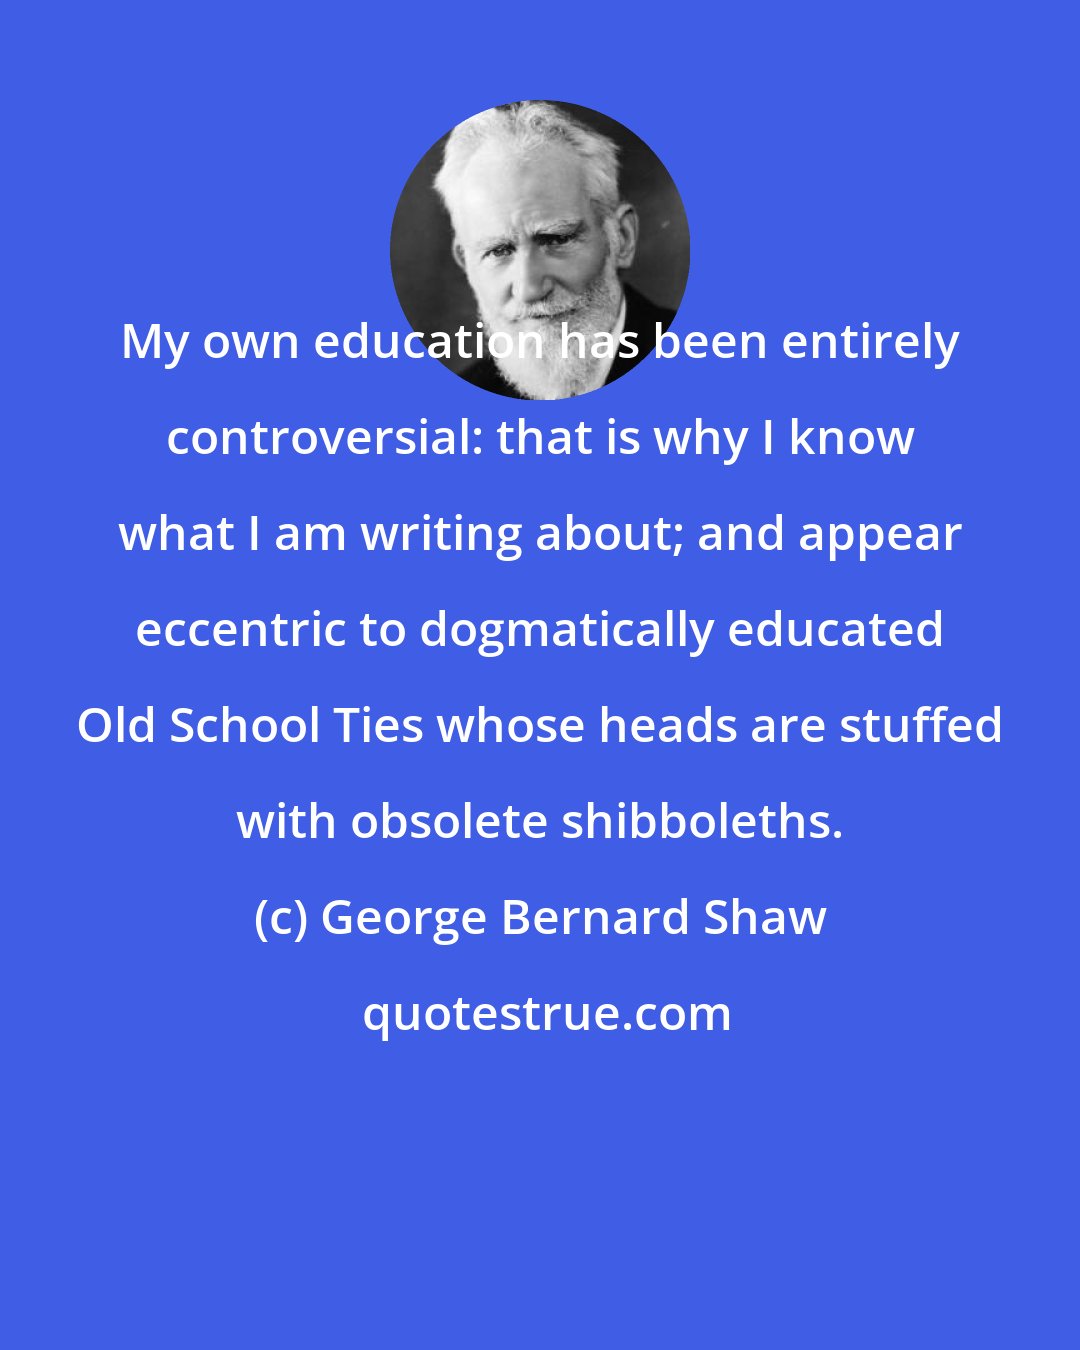 George Bernard Shaw: My own education has been entirely controversial: that is why I know what I am writing about; and appear eccentric to dogmatically educated Old School Ties whose heads are stuffed with obsolete shibboleths.